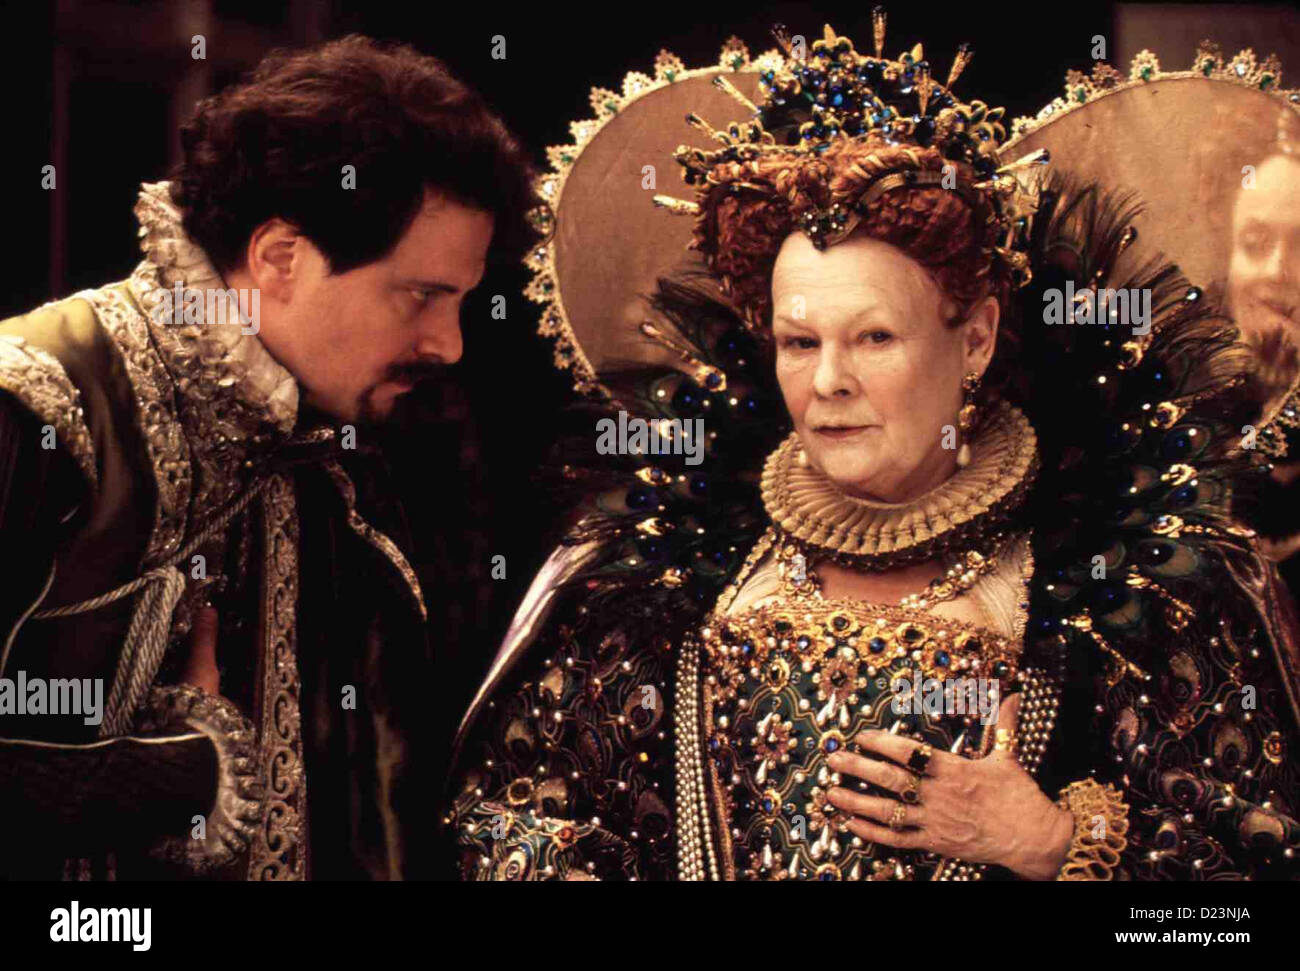 Shakespeare in Love Shakespeare in Love Lord Wessex (Colin Firth), Queen Elizabeth (Judi Dench) *** légende locale *** 1998 Banque D'Images